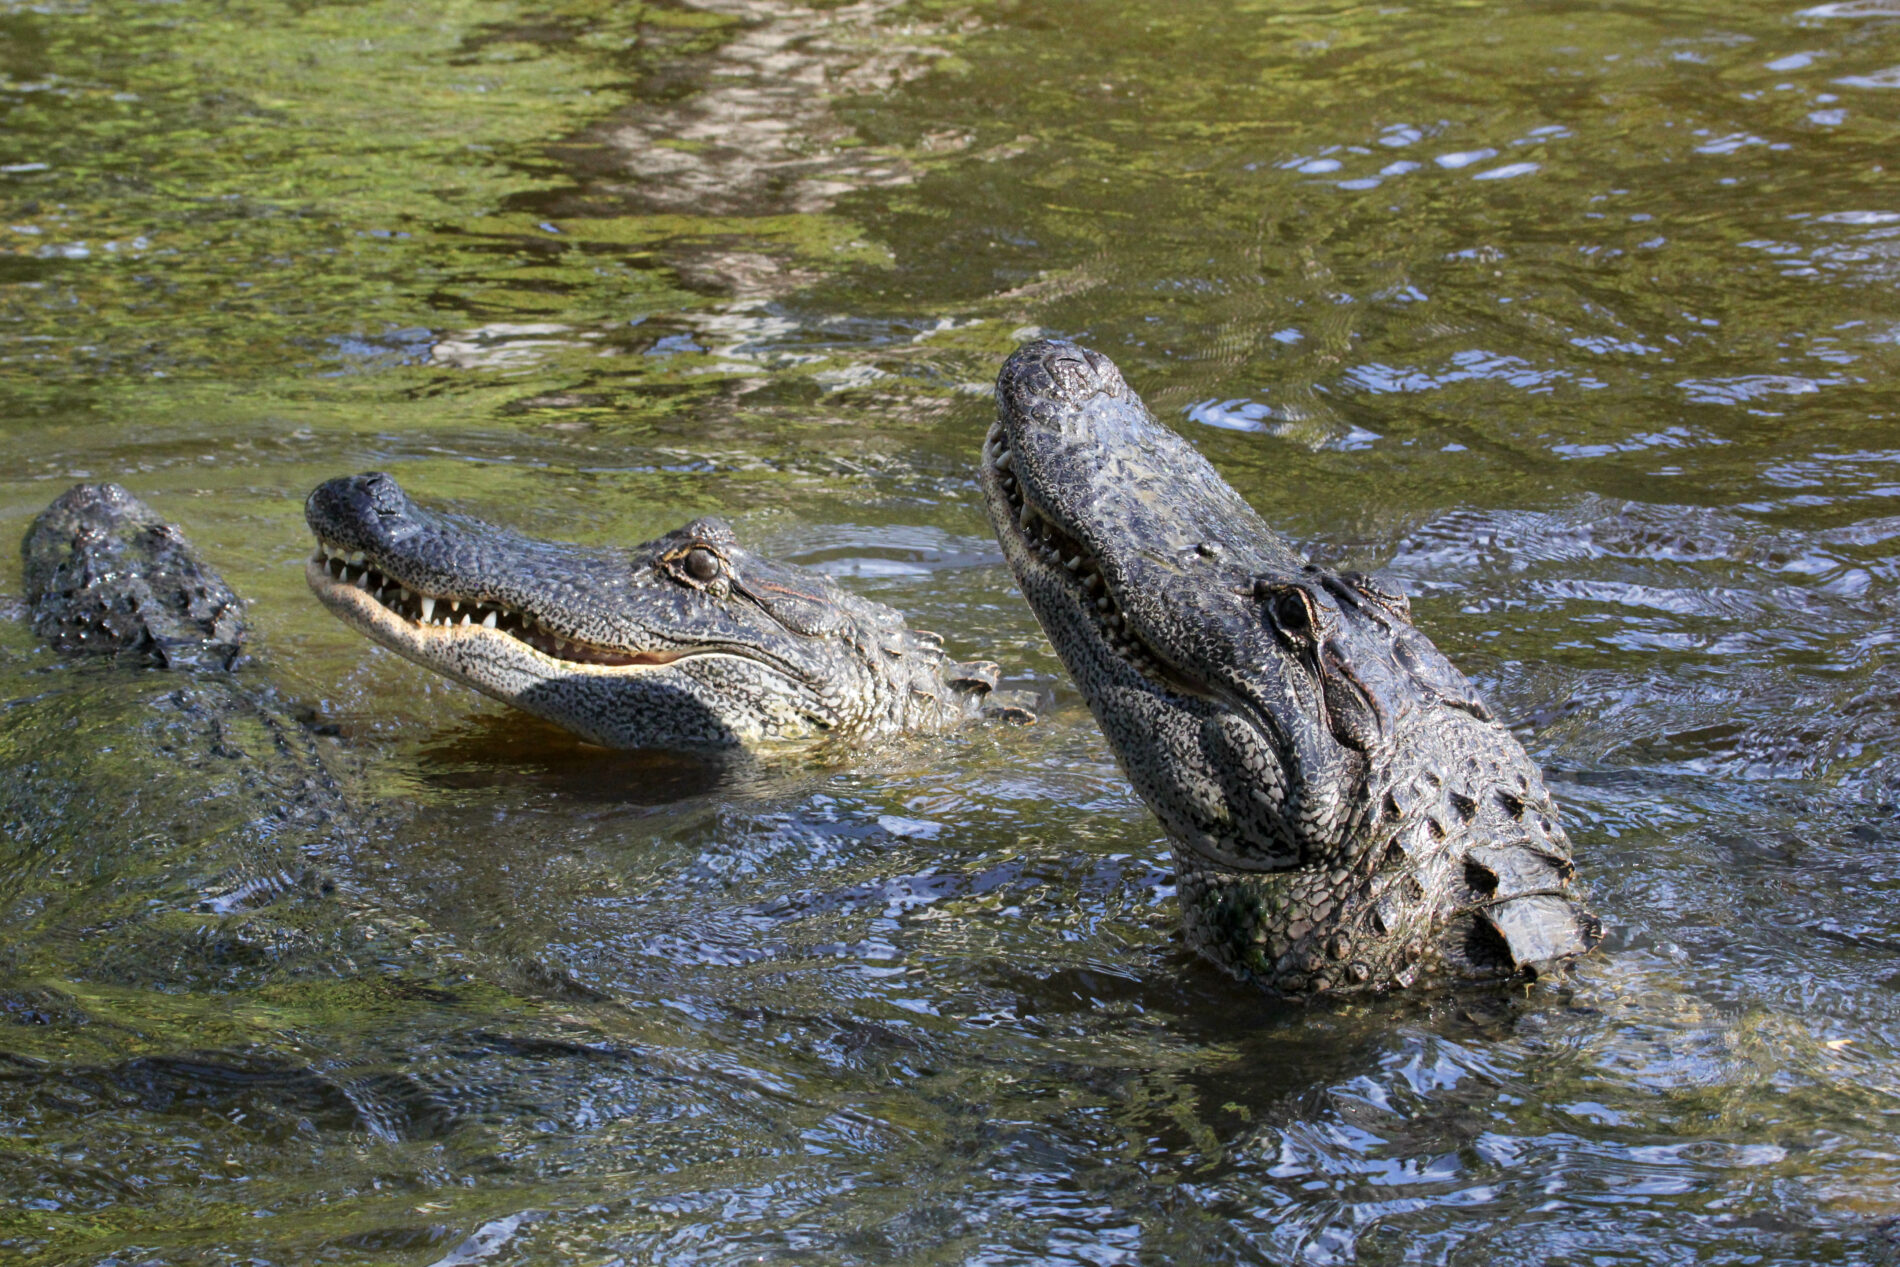 Alligator tours provide you with up close and personal looks at these reptiles.